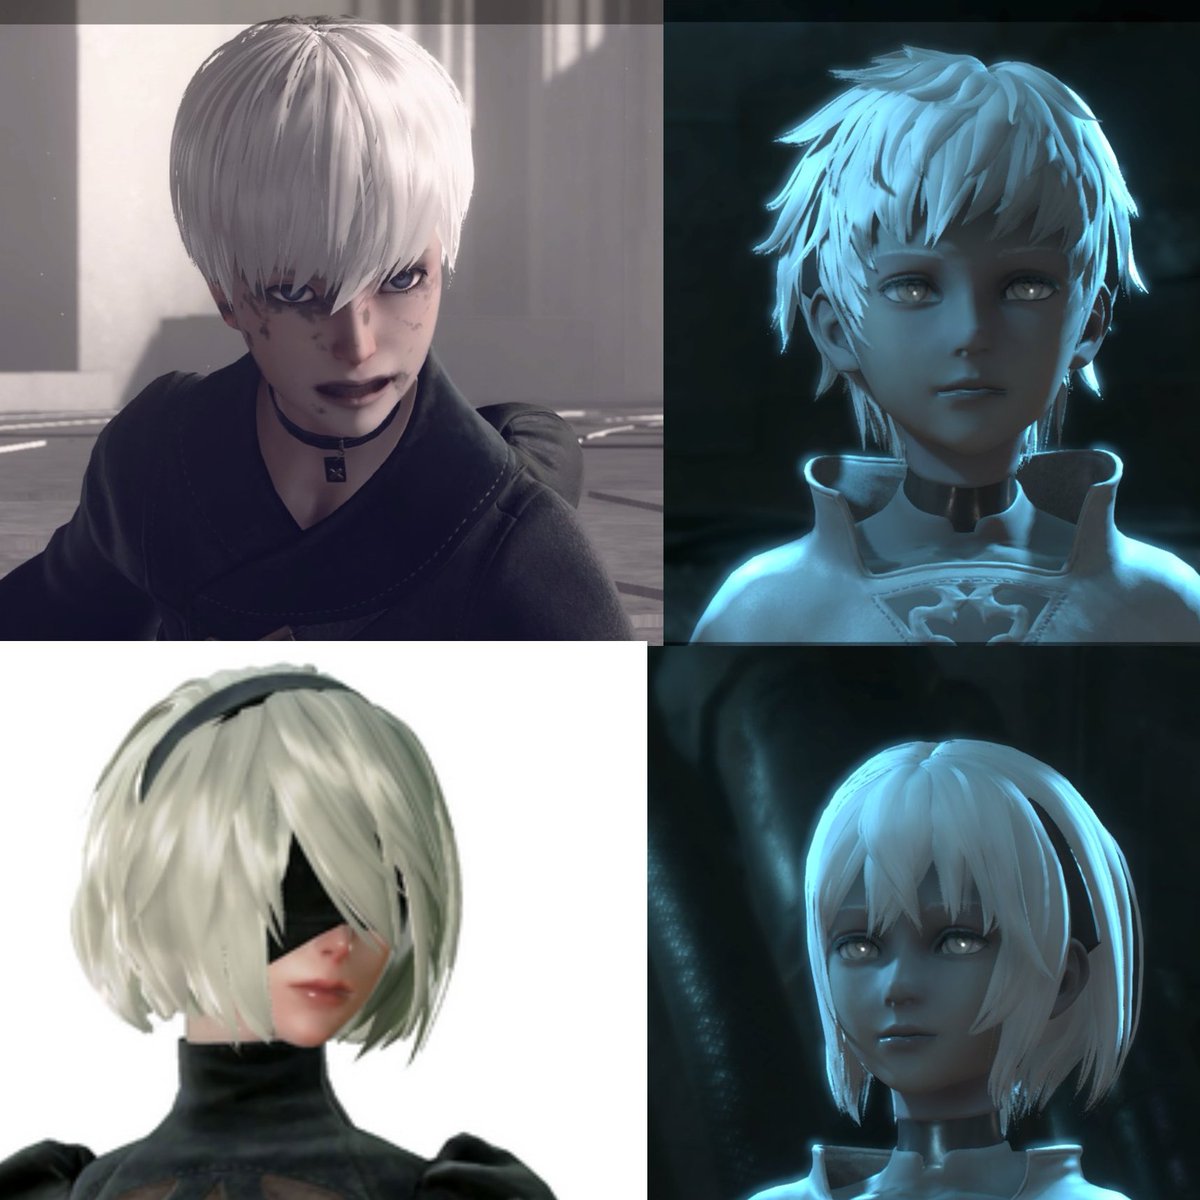 I know 9S is a different person from the previous Nine model YoRHas, but NieR Replicant and Lost World Appendix ver.1.22 do imply to me at least that the source of his models overall mental imbalance and obsession with 2B stems from the Overseer promise to reunite with his sister